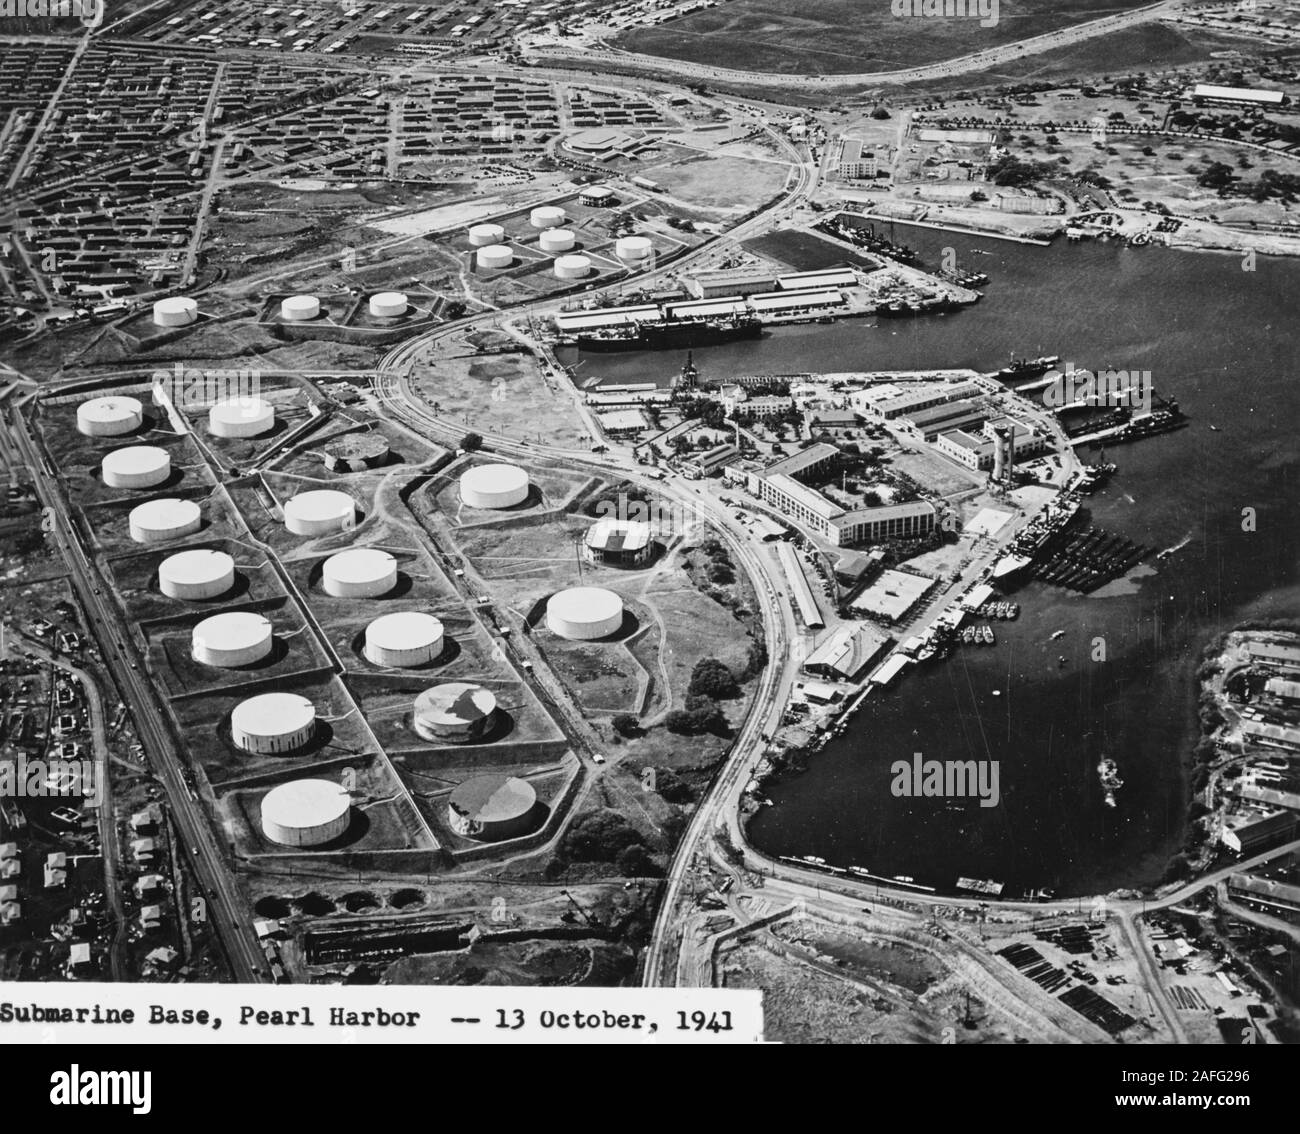 Pearl Harbor - Aerial view of the Submarine Base (right center) with the fuel farm at left, looking south on 13 October 1941. Among the 16 fuel tanks in the lower group and ten tanks in the upper group are two that have been painted to resemble buildings (topmost tank in upper group, and rightmost tank in lower group). Other tanks appear to be painted to look like terrain features. Alongside the wharf in right center are USS Niagara (PG-52) with seven or eight PT boats alongside (nearest to camera), and USS Holland (AS-3) with seven submarines alongside. Before attack Stock Photo